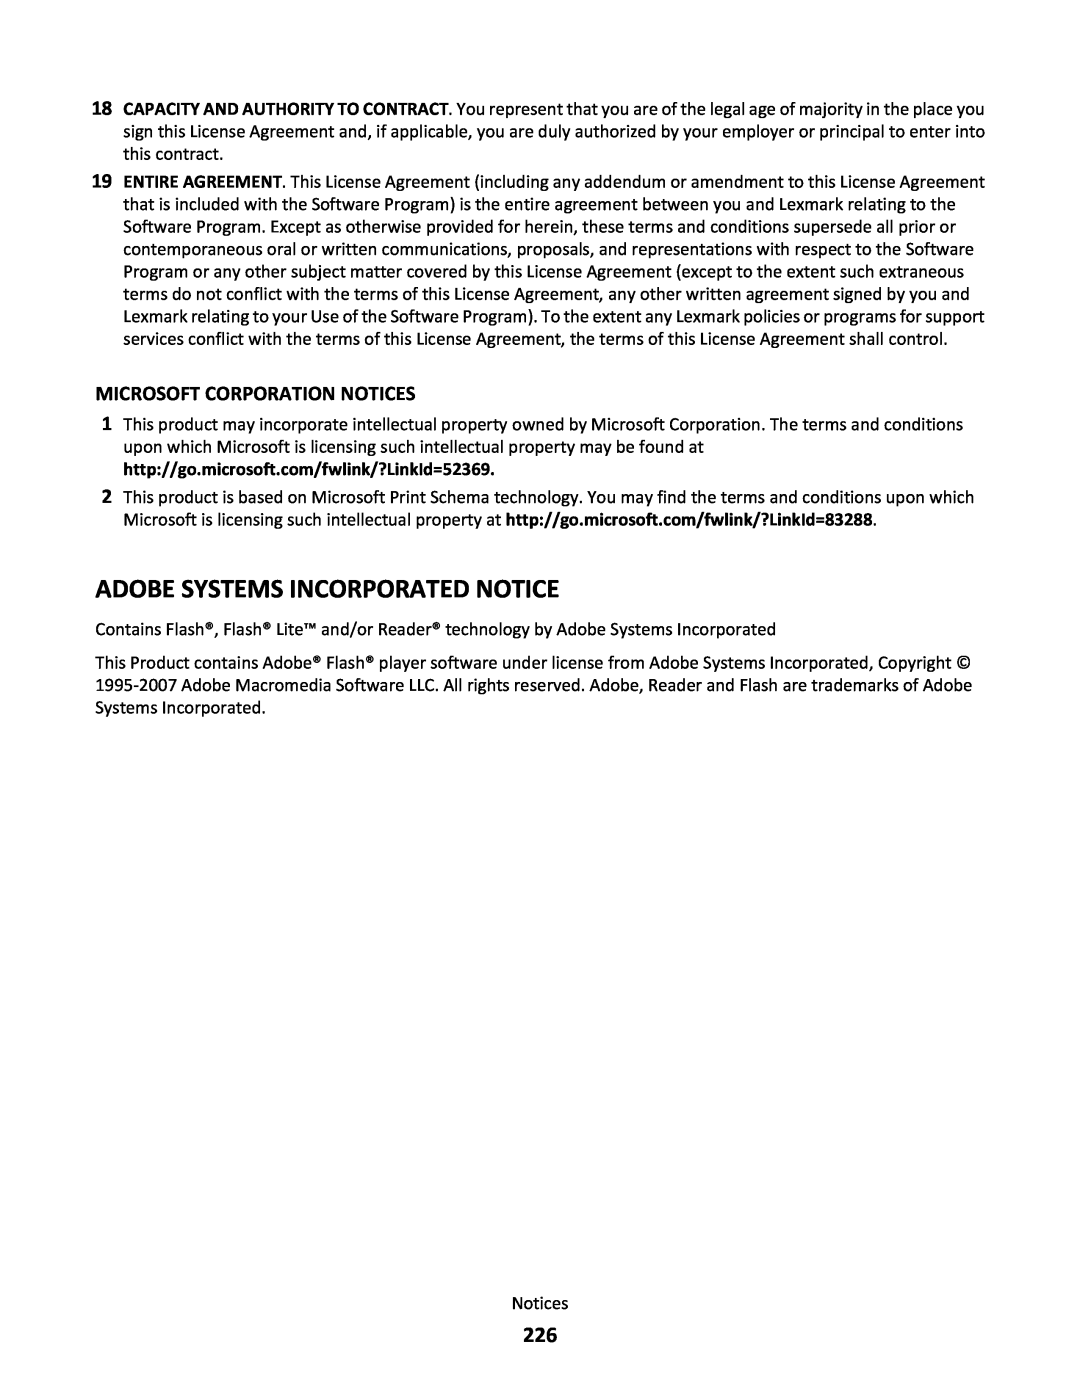 Lexmark C790 manual Adobe Systems Incorporated Notice, Microsoft Corporation Notices 